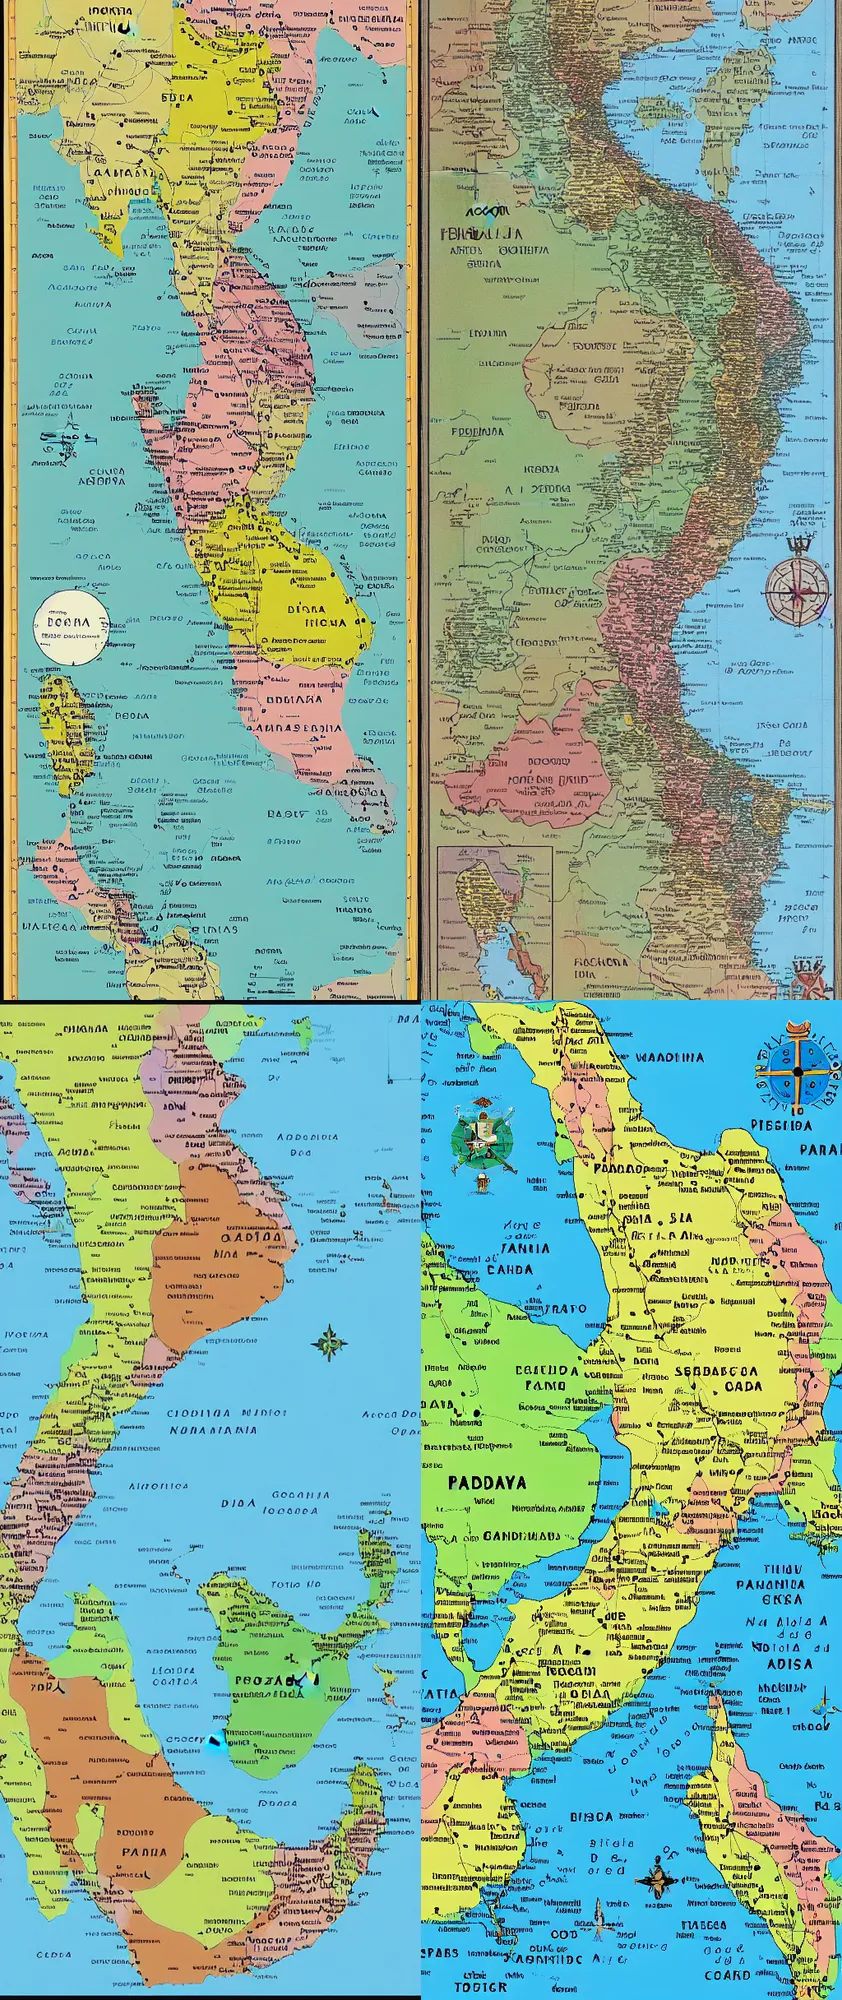 Prompt: A map of Indonesia